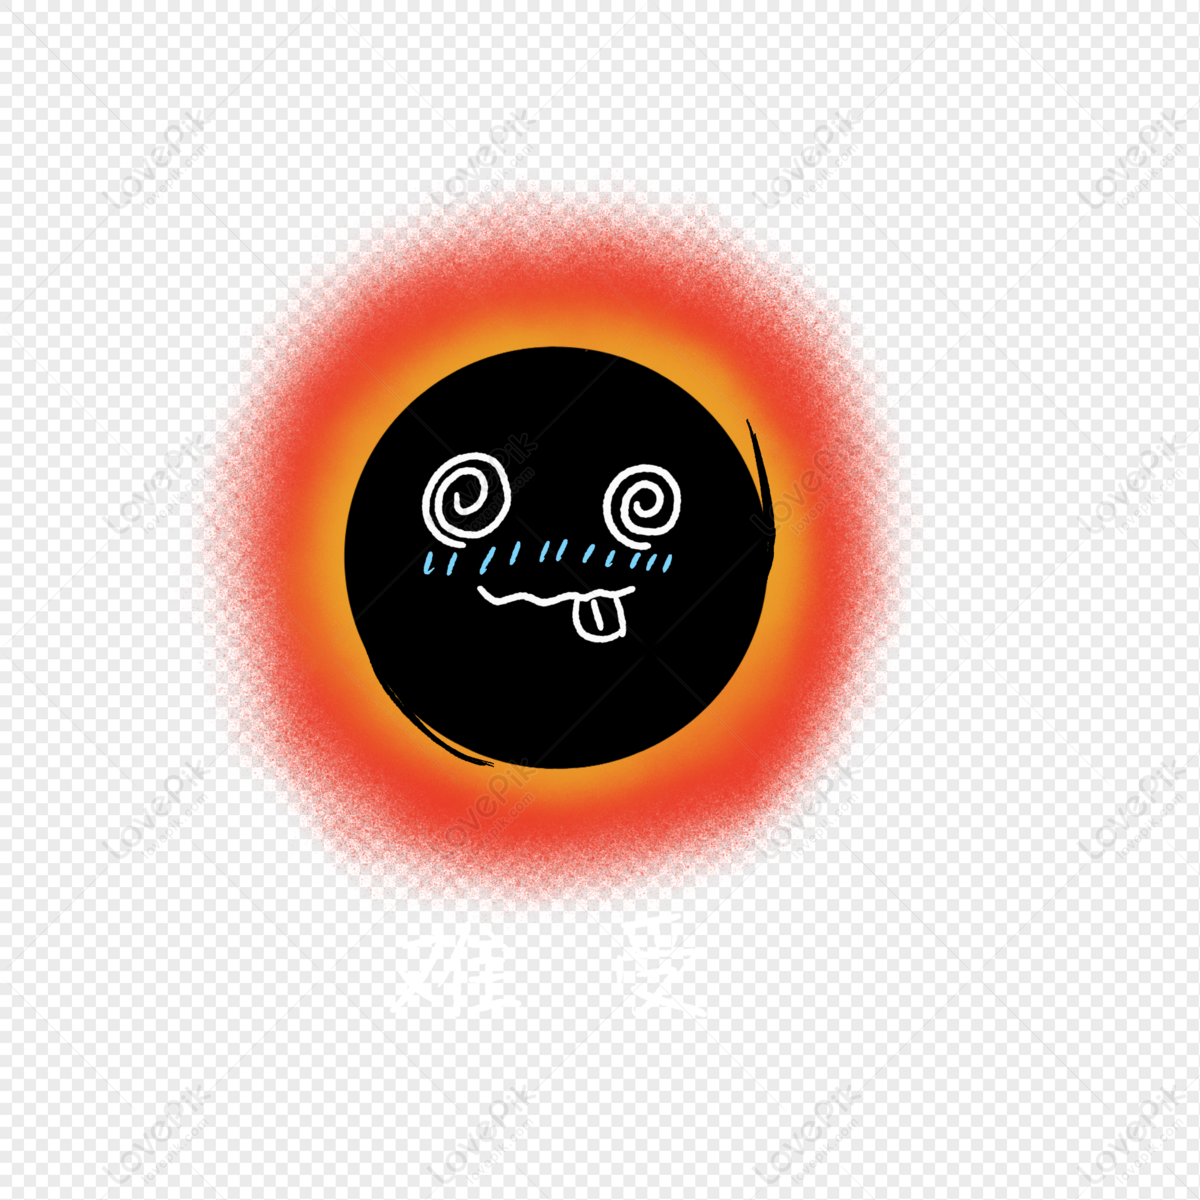 Black Hole Expression Pack PNG Image And Clipart Image For Free Download -  Lovepik | 401156808